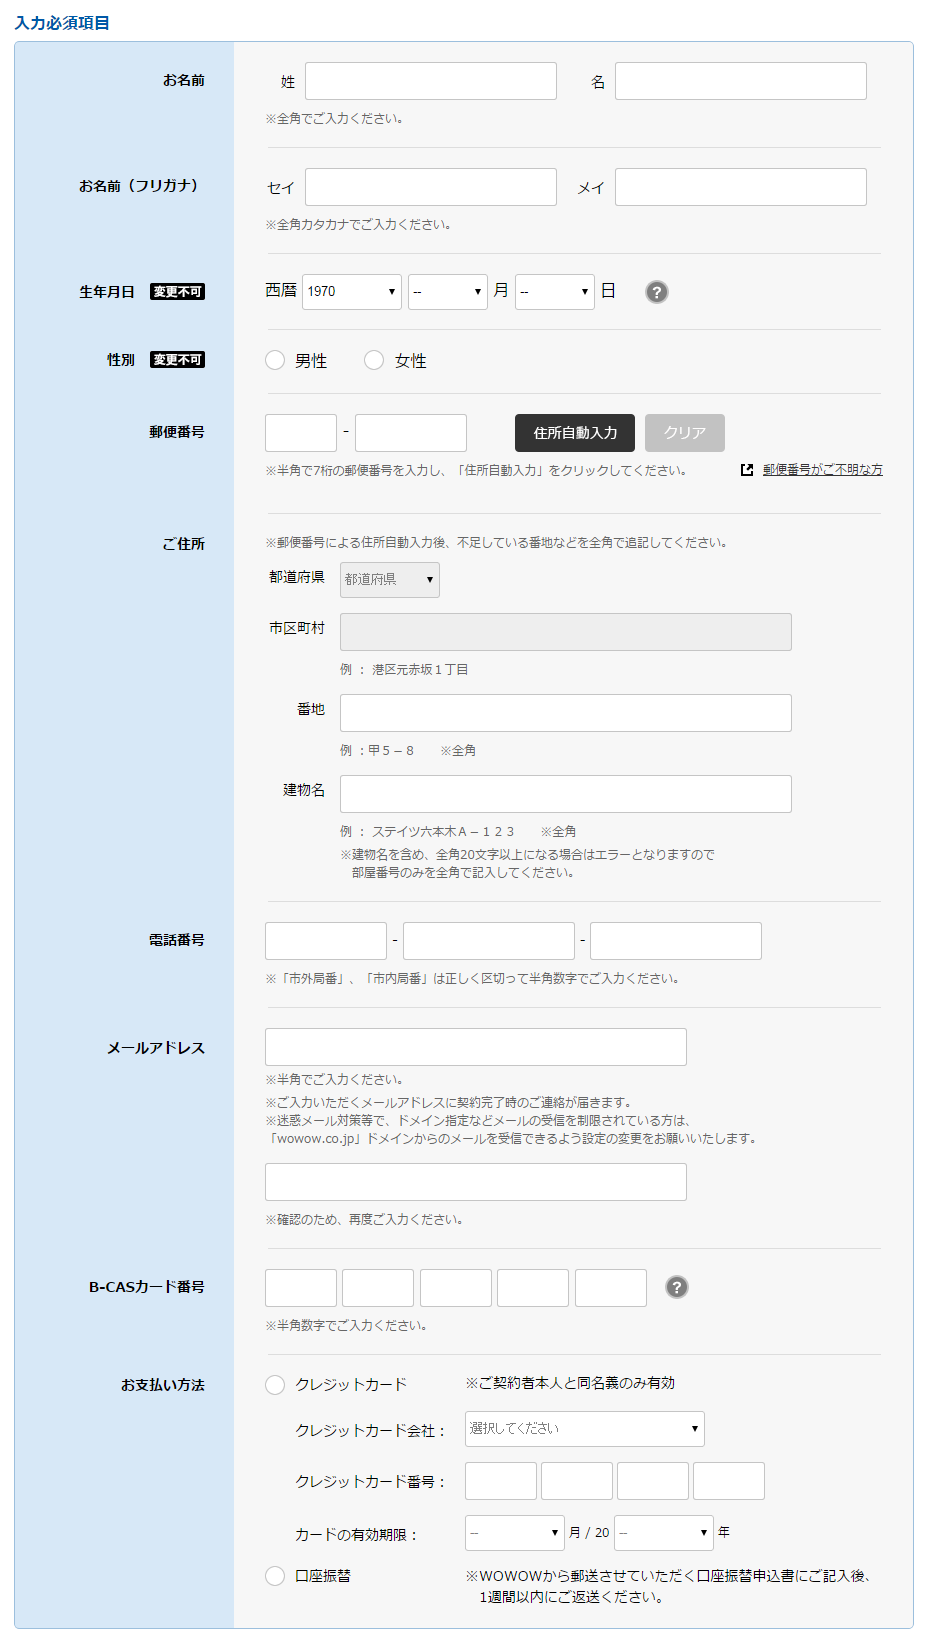 screencapture-www-wowow-co-jp-support-subscribe-regist_entry-php-1430922439287_03